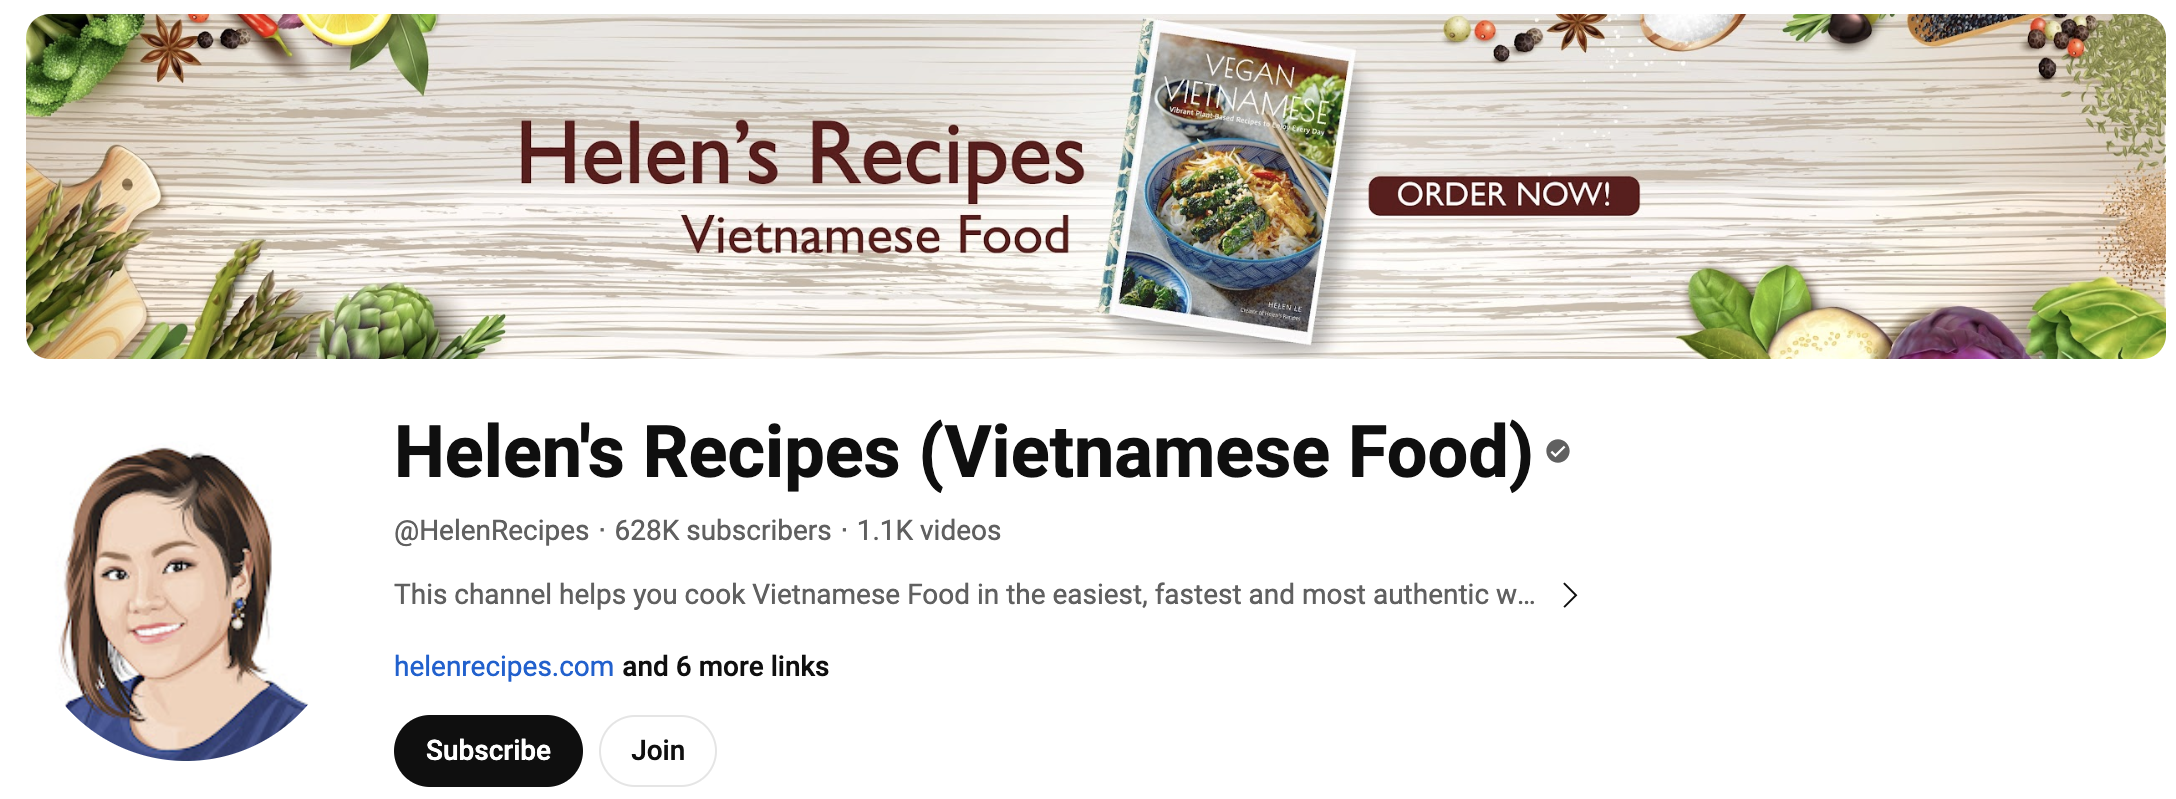 Screenshot of the homepage for Helen's Recipes YouTube channel